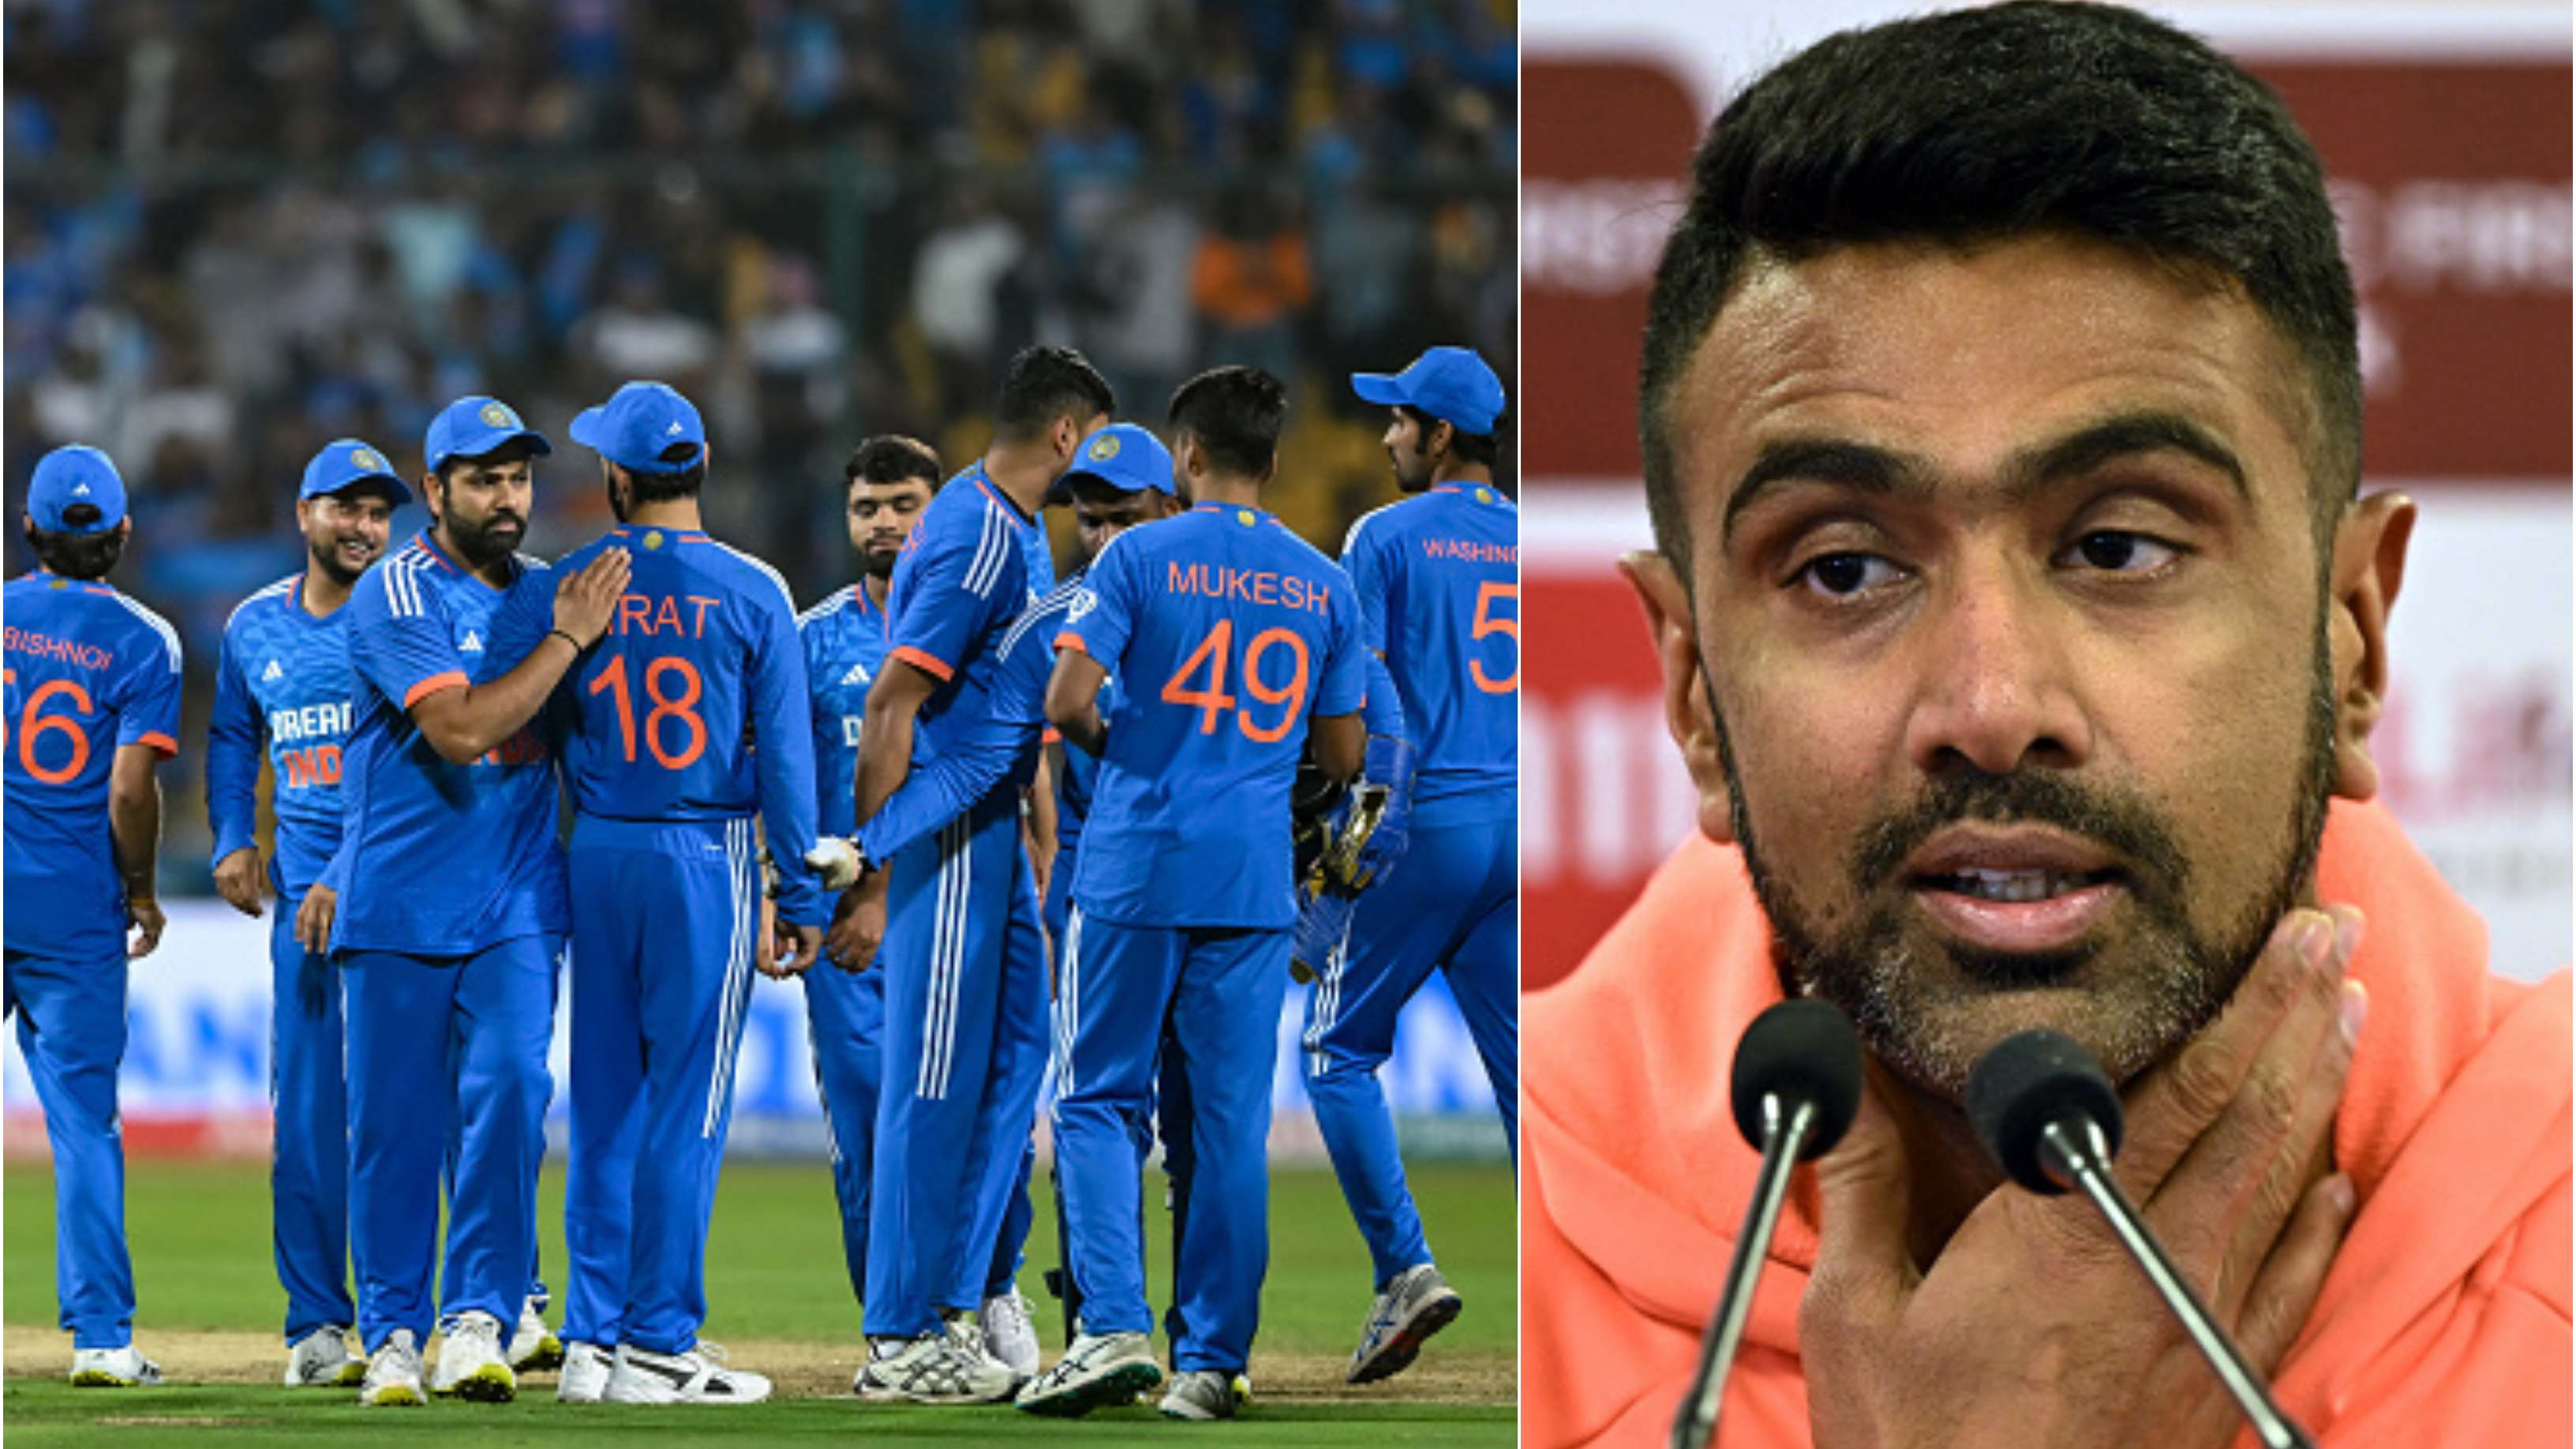 “Another year where T20 World Cup follows the IPL final”: R Ashwin expresses concerns over India’s cricket schedule